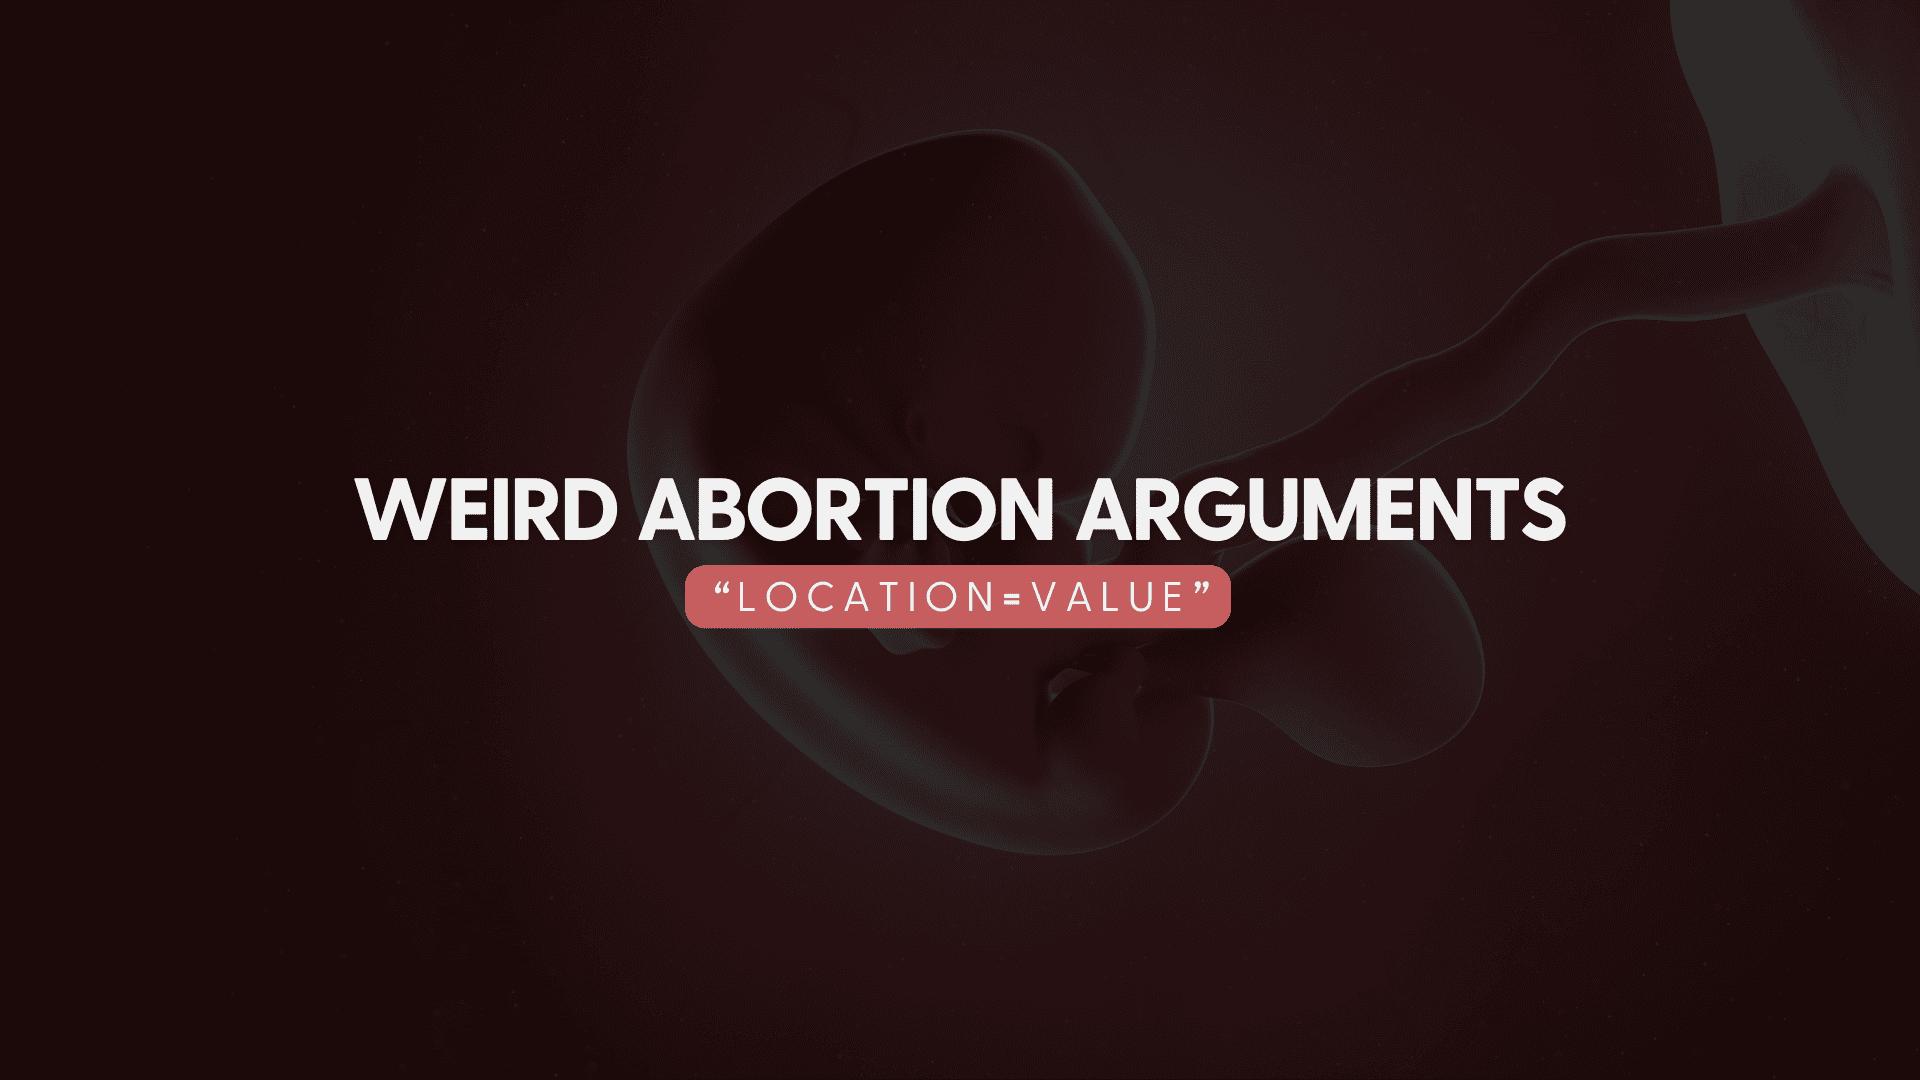 the weirdest abortion argument about how location determines your worth and fetus rights